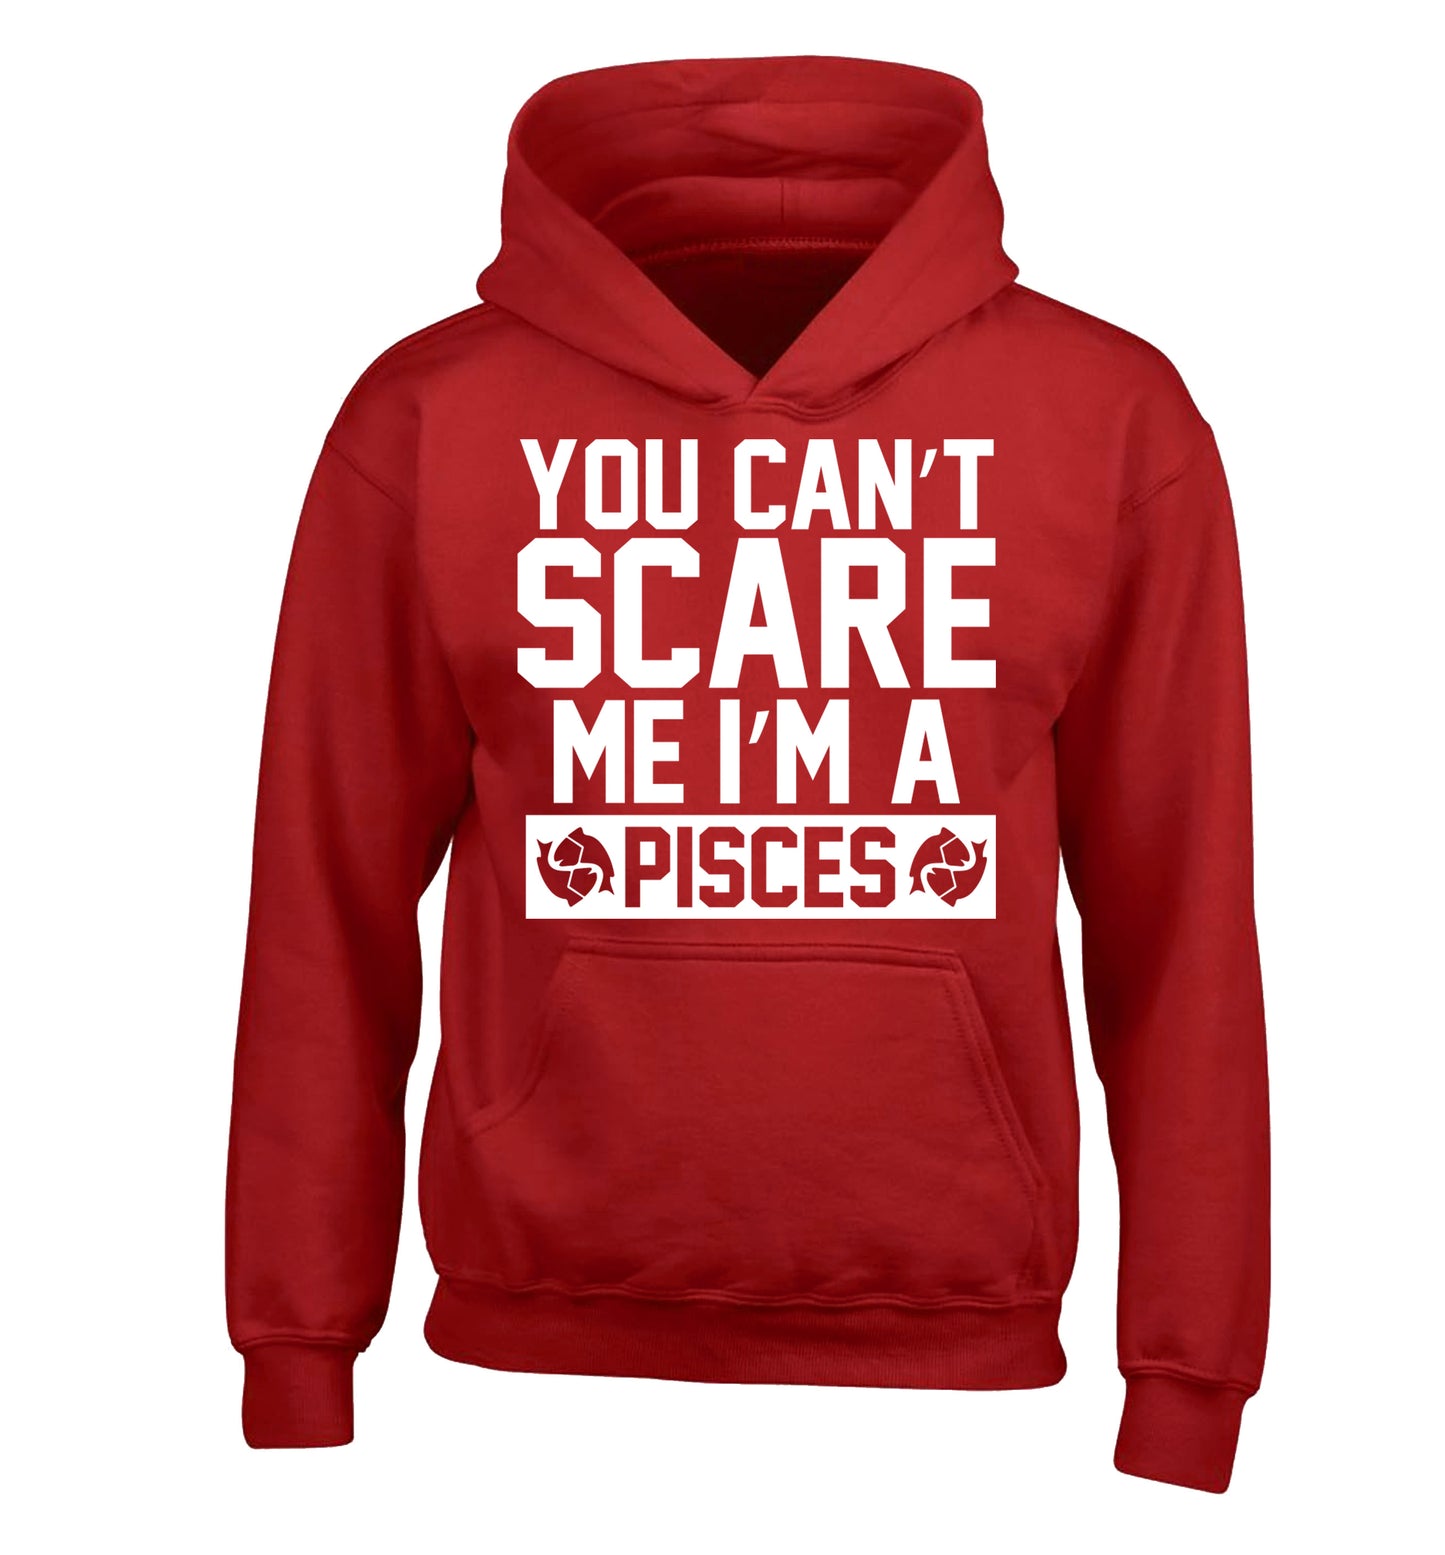 You can't scare me I'm a pisces children's red hoodie 12-13 Years